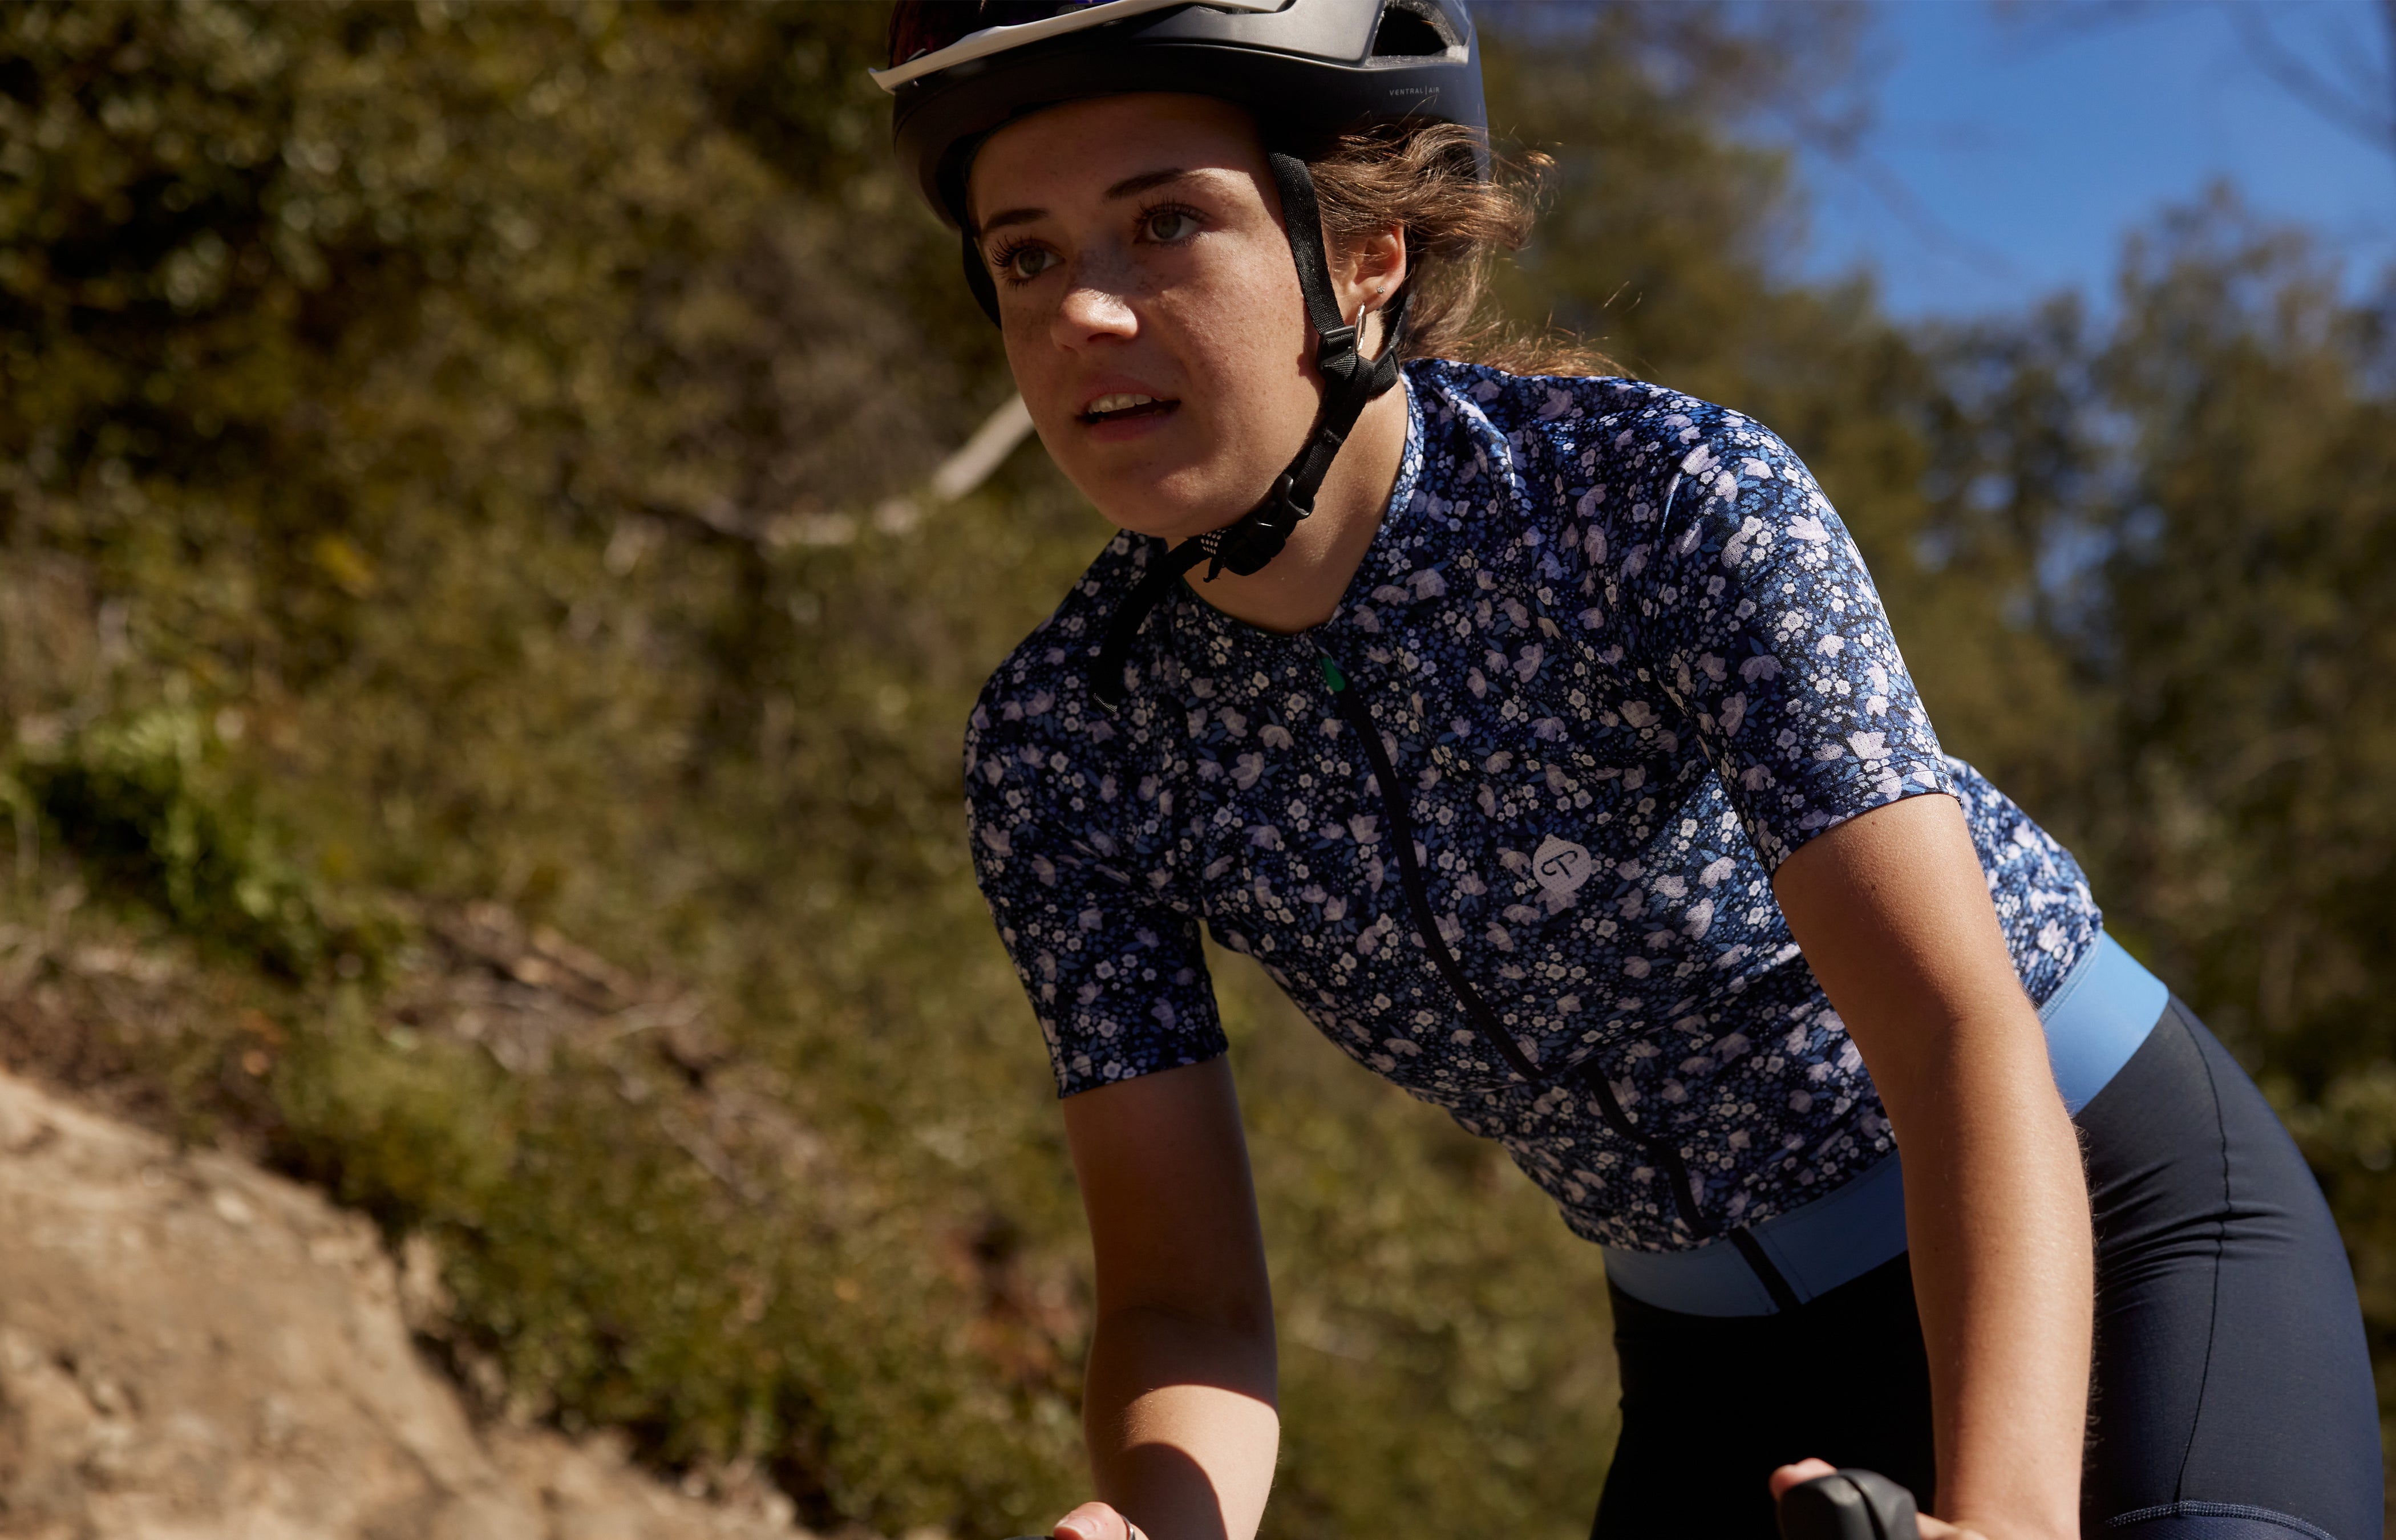 Troylee - Mountain Bike Shirts, Shorts and Accessories – Oberson